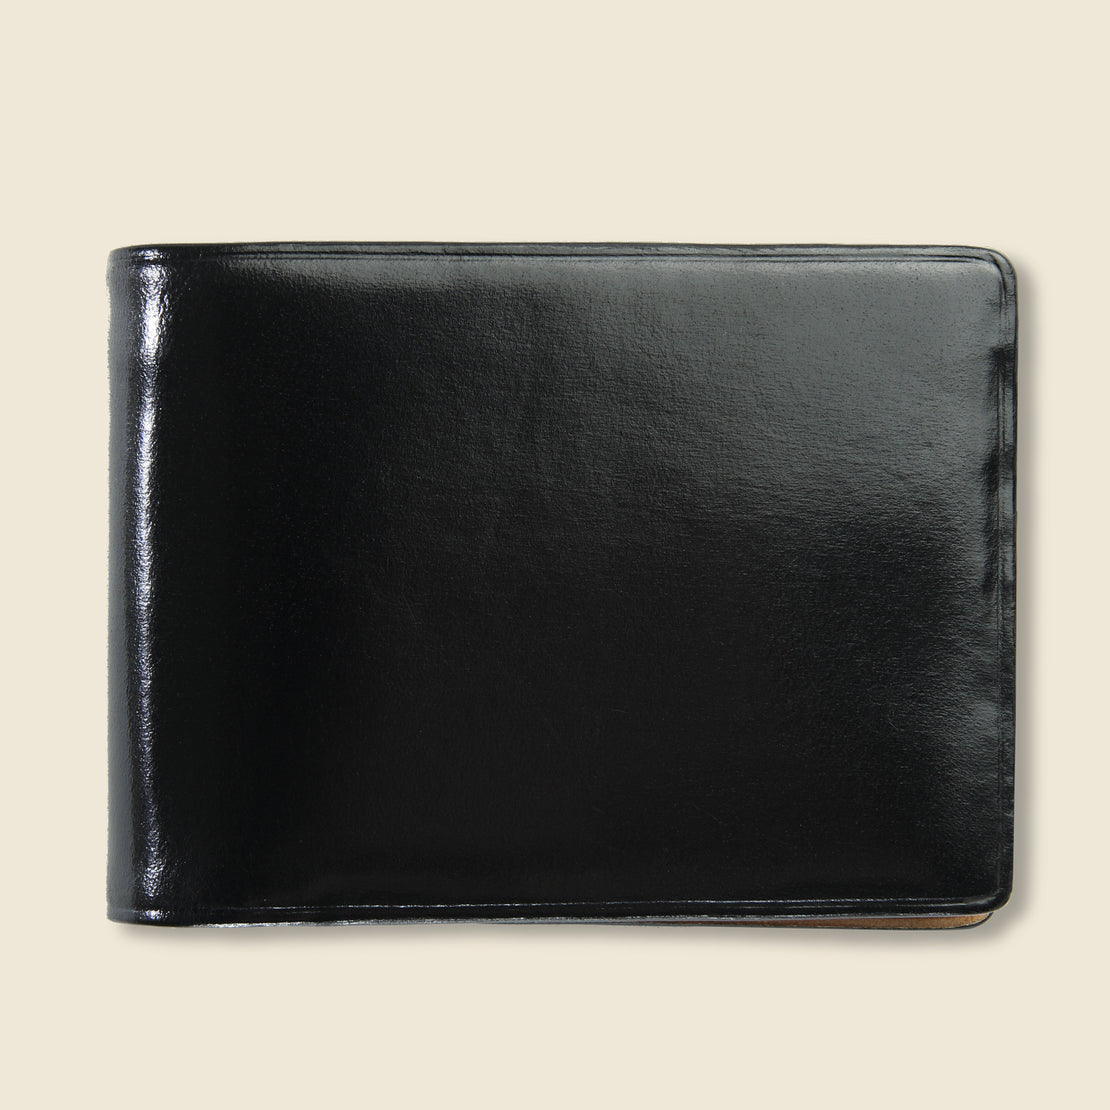 The Small Bifold wallet